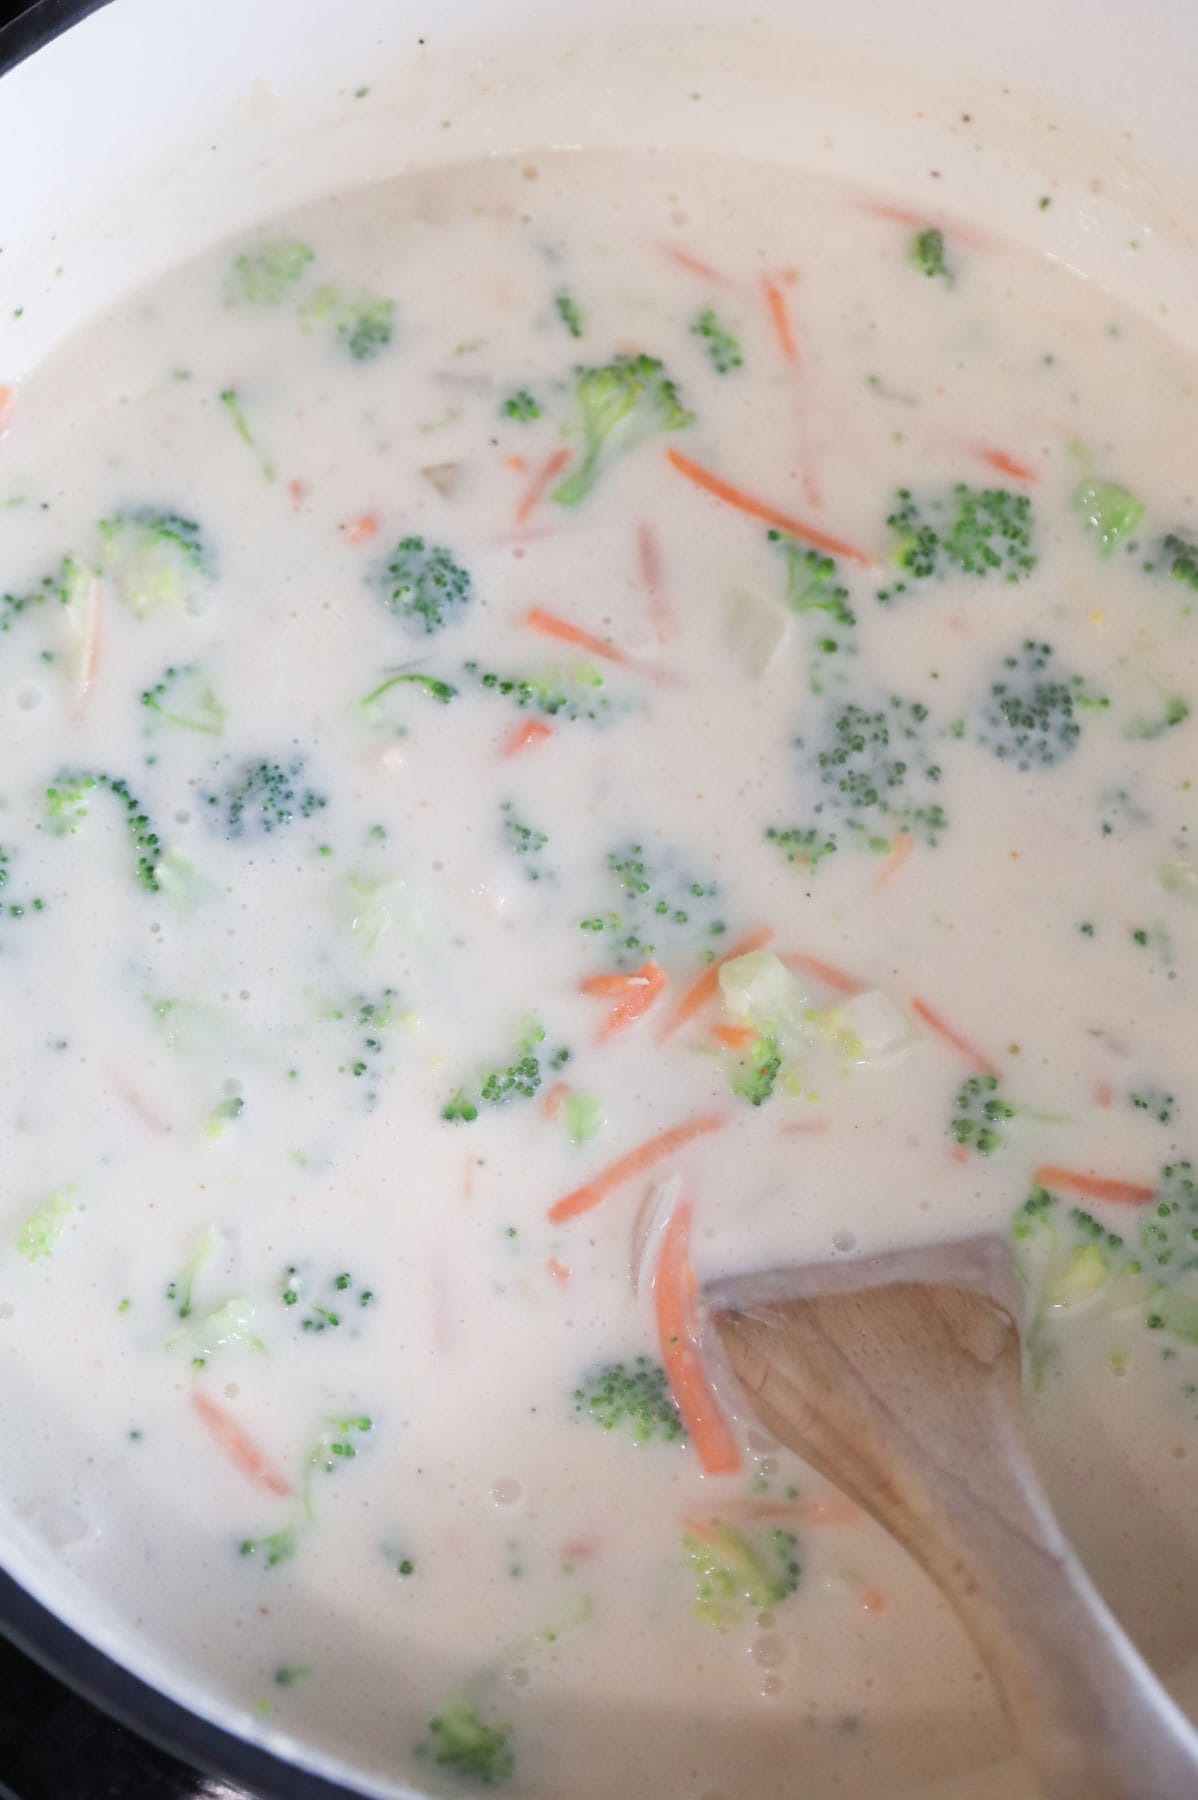 broccoli florets and shredded carrots being stirred into creamy soup